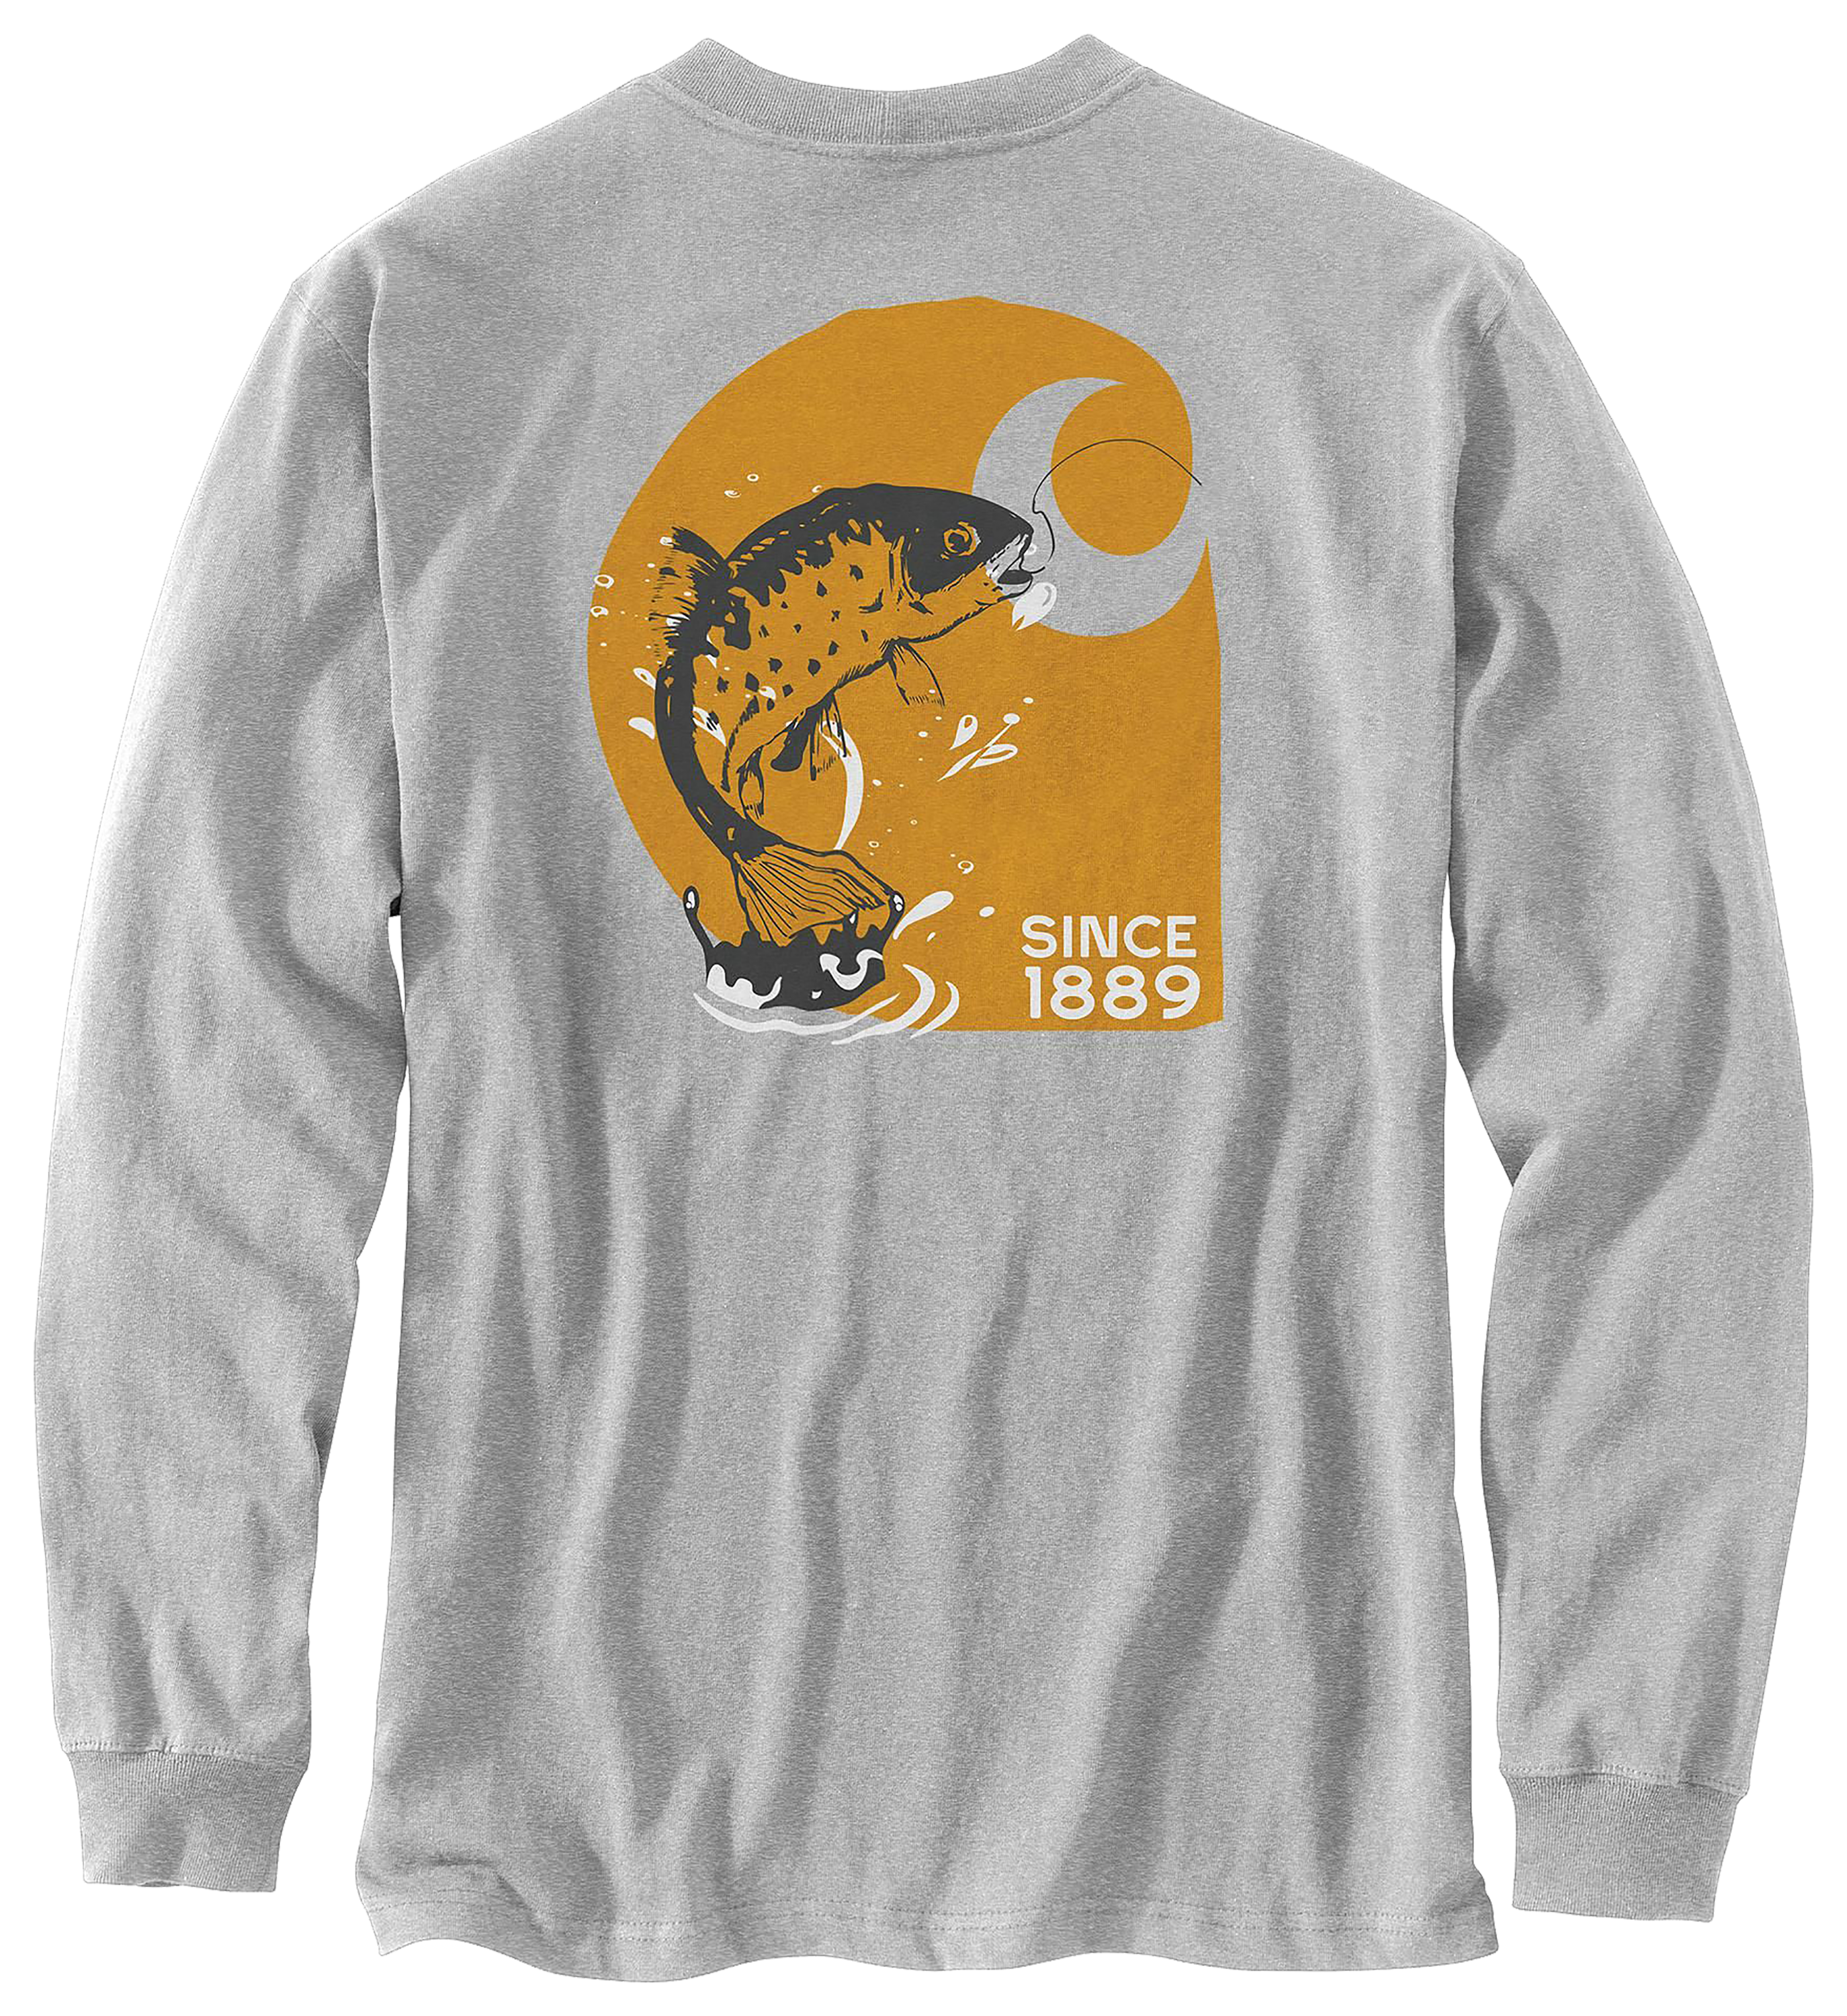 NWT Mens Blue Reel Legends Long Sleeve Graphic Fish T-shirt Size